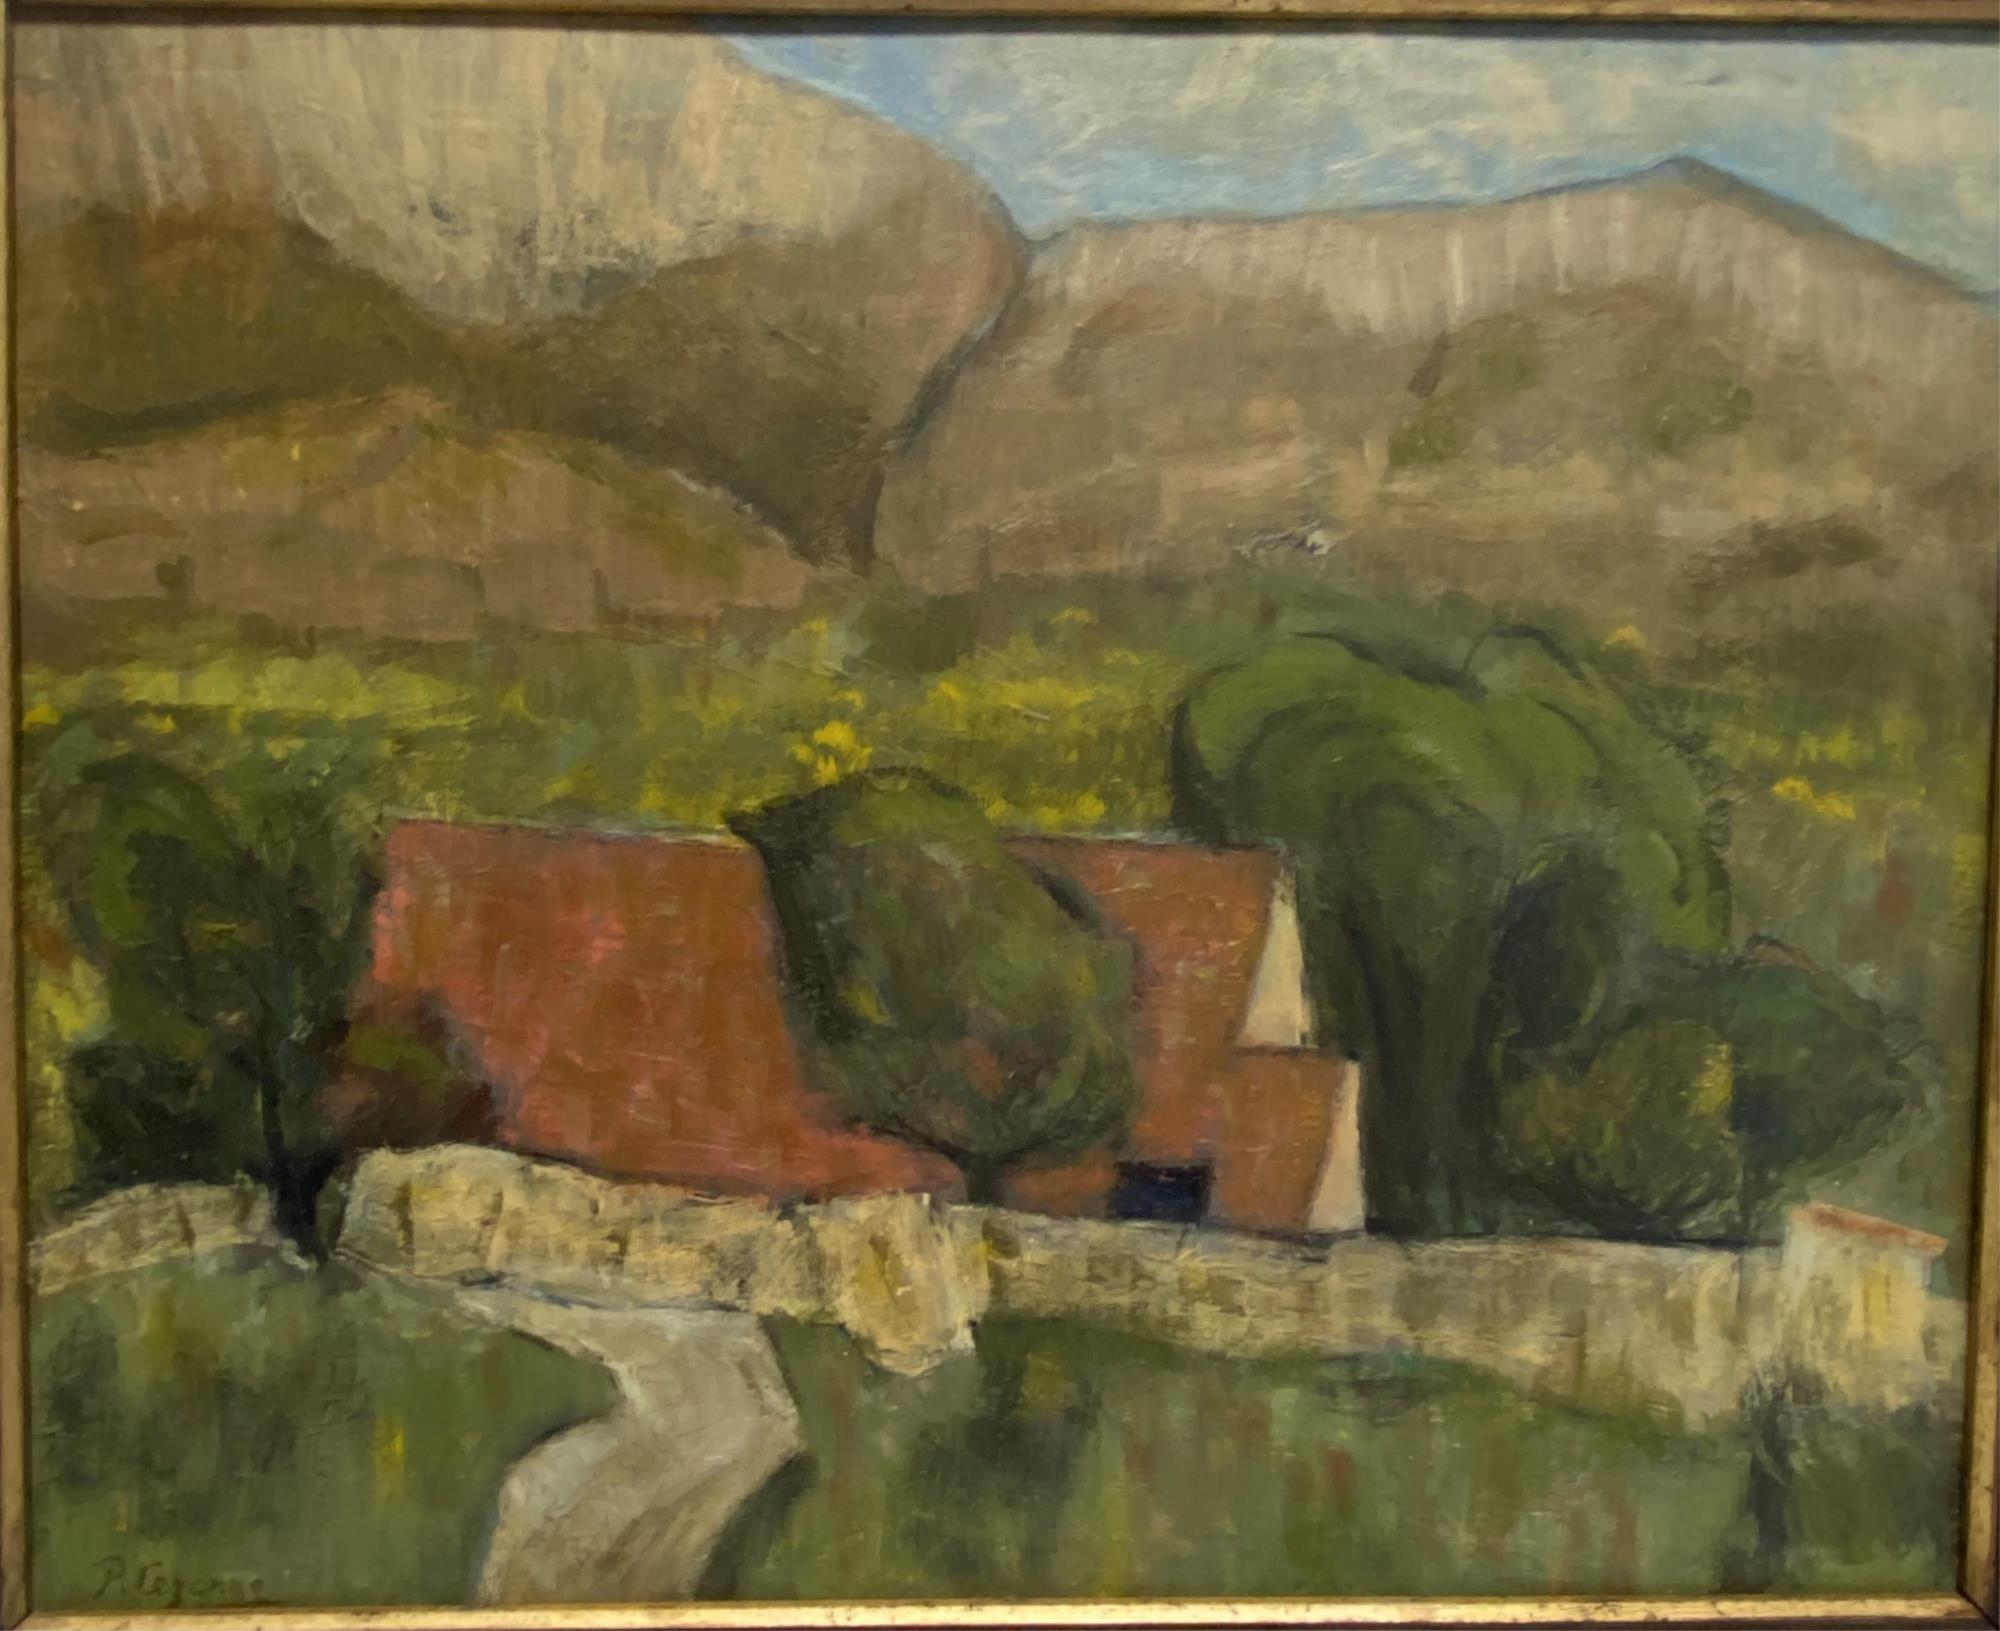 OIL ON BOARD - SIGNED P. CEZANNE, IN THE MANNER OF